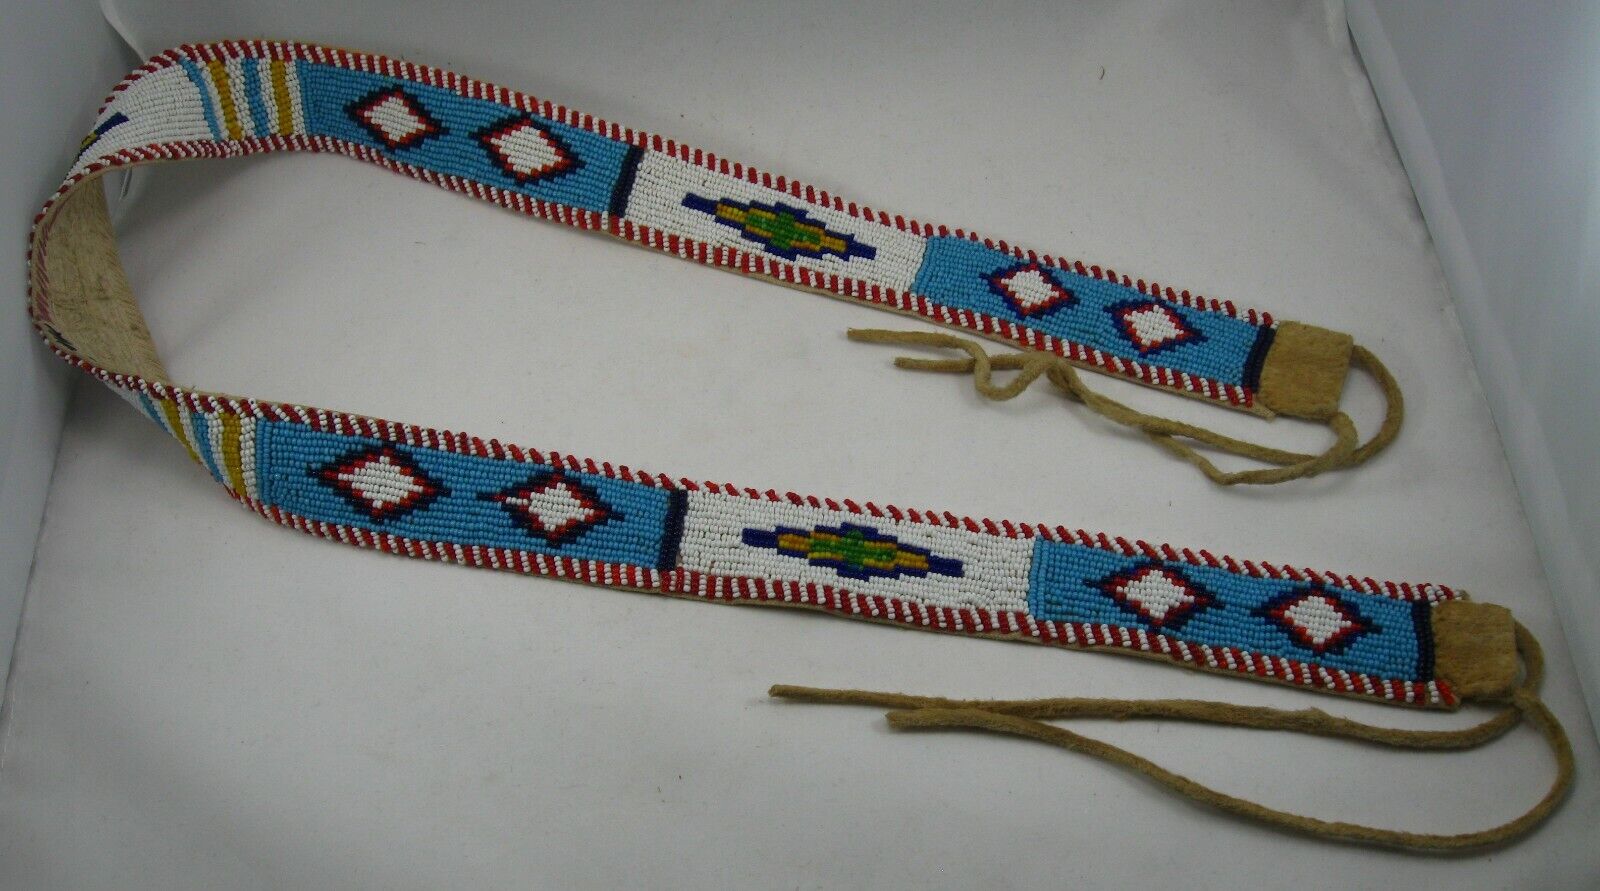 Early 1900s Dogrib (Northern Athabaskan) Beaded Dress Belt, Geometric Designs